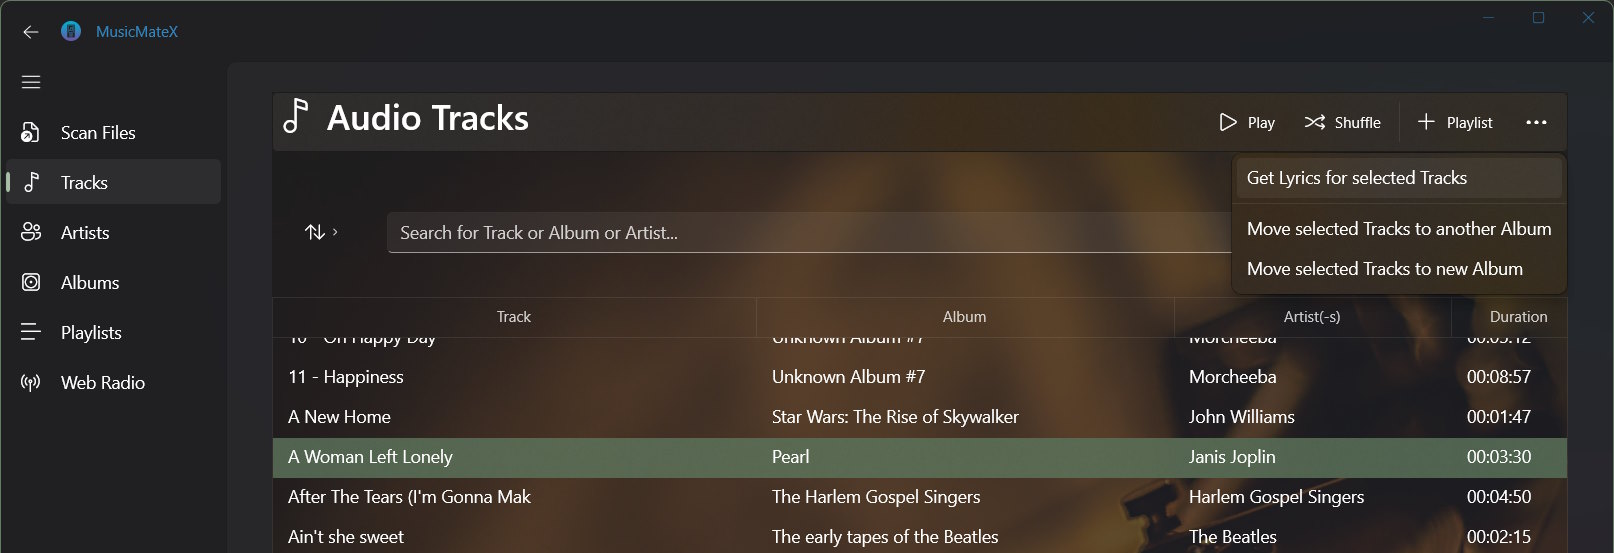 audio track page - get song lyrics command